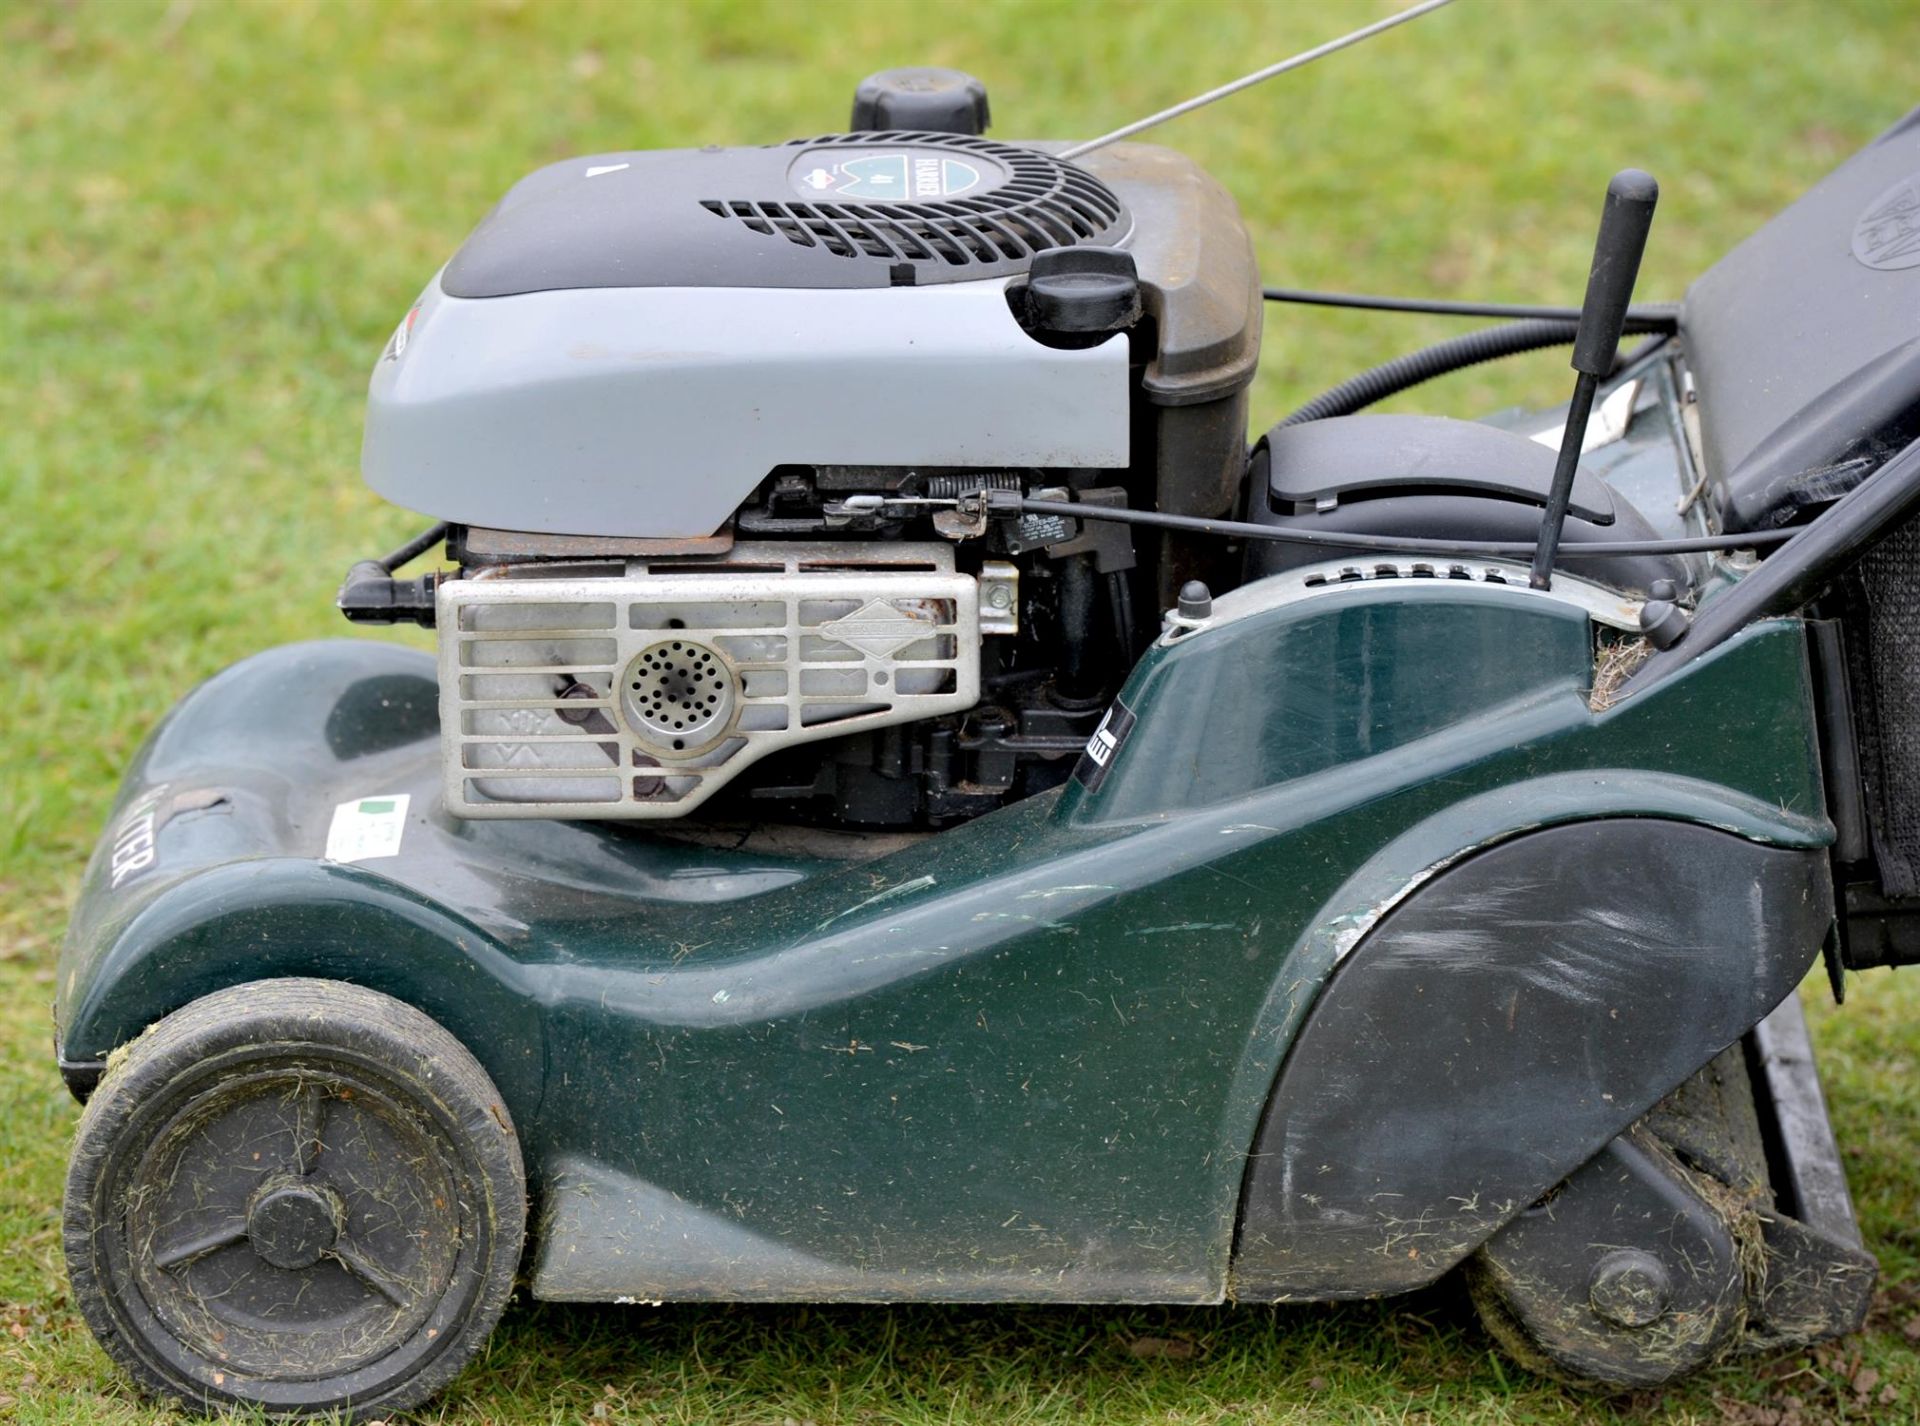 Hayter Harrier 41 lawnmower, Briggs & Stratton Lawn Mowers, purchased from Andrews of Hindhead - Image 5 of 9